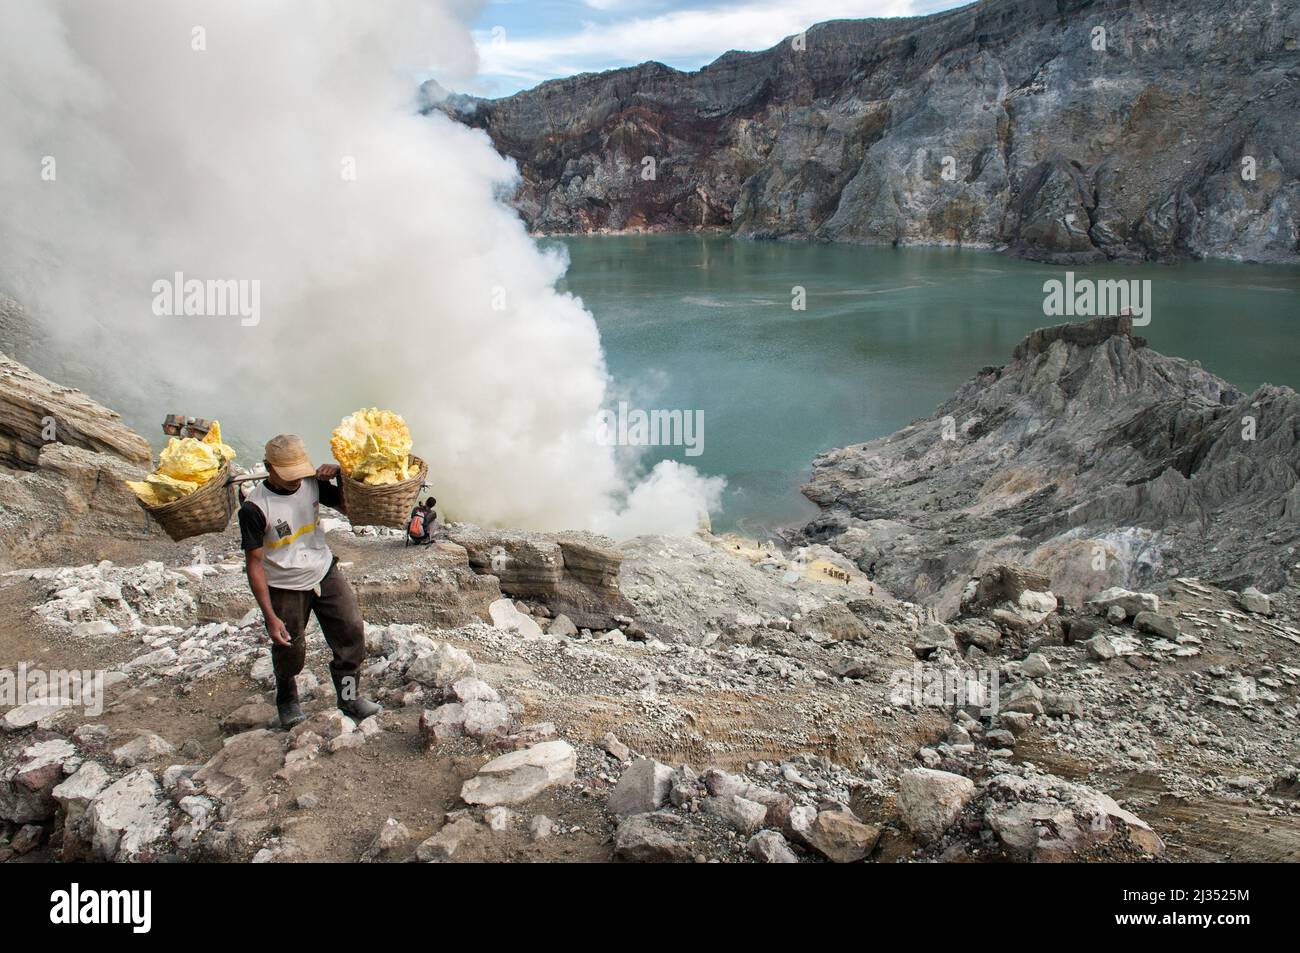 Miner carrying sulfur from the Ijen volcano crater, Java Island, Indonesia Stock Photo